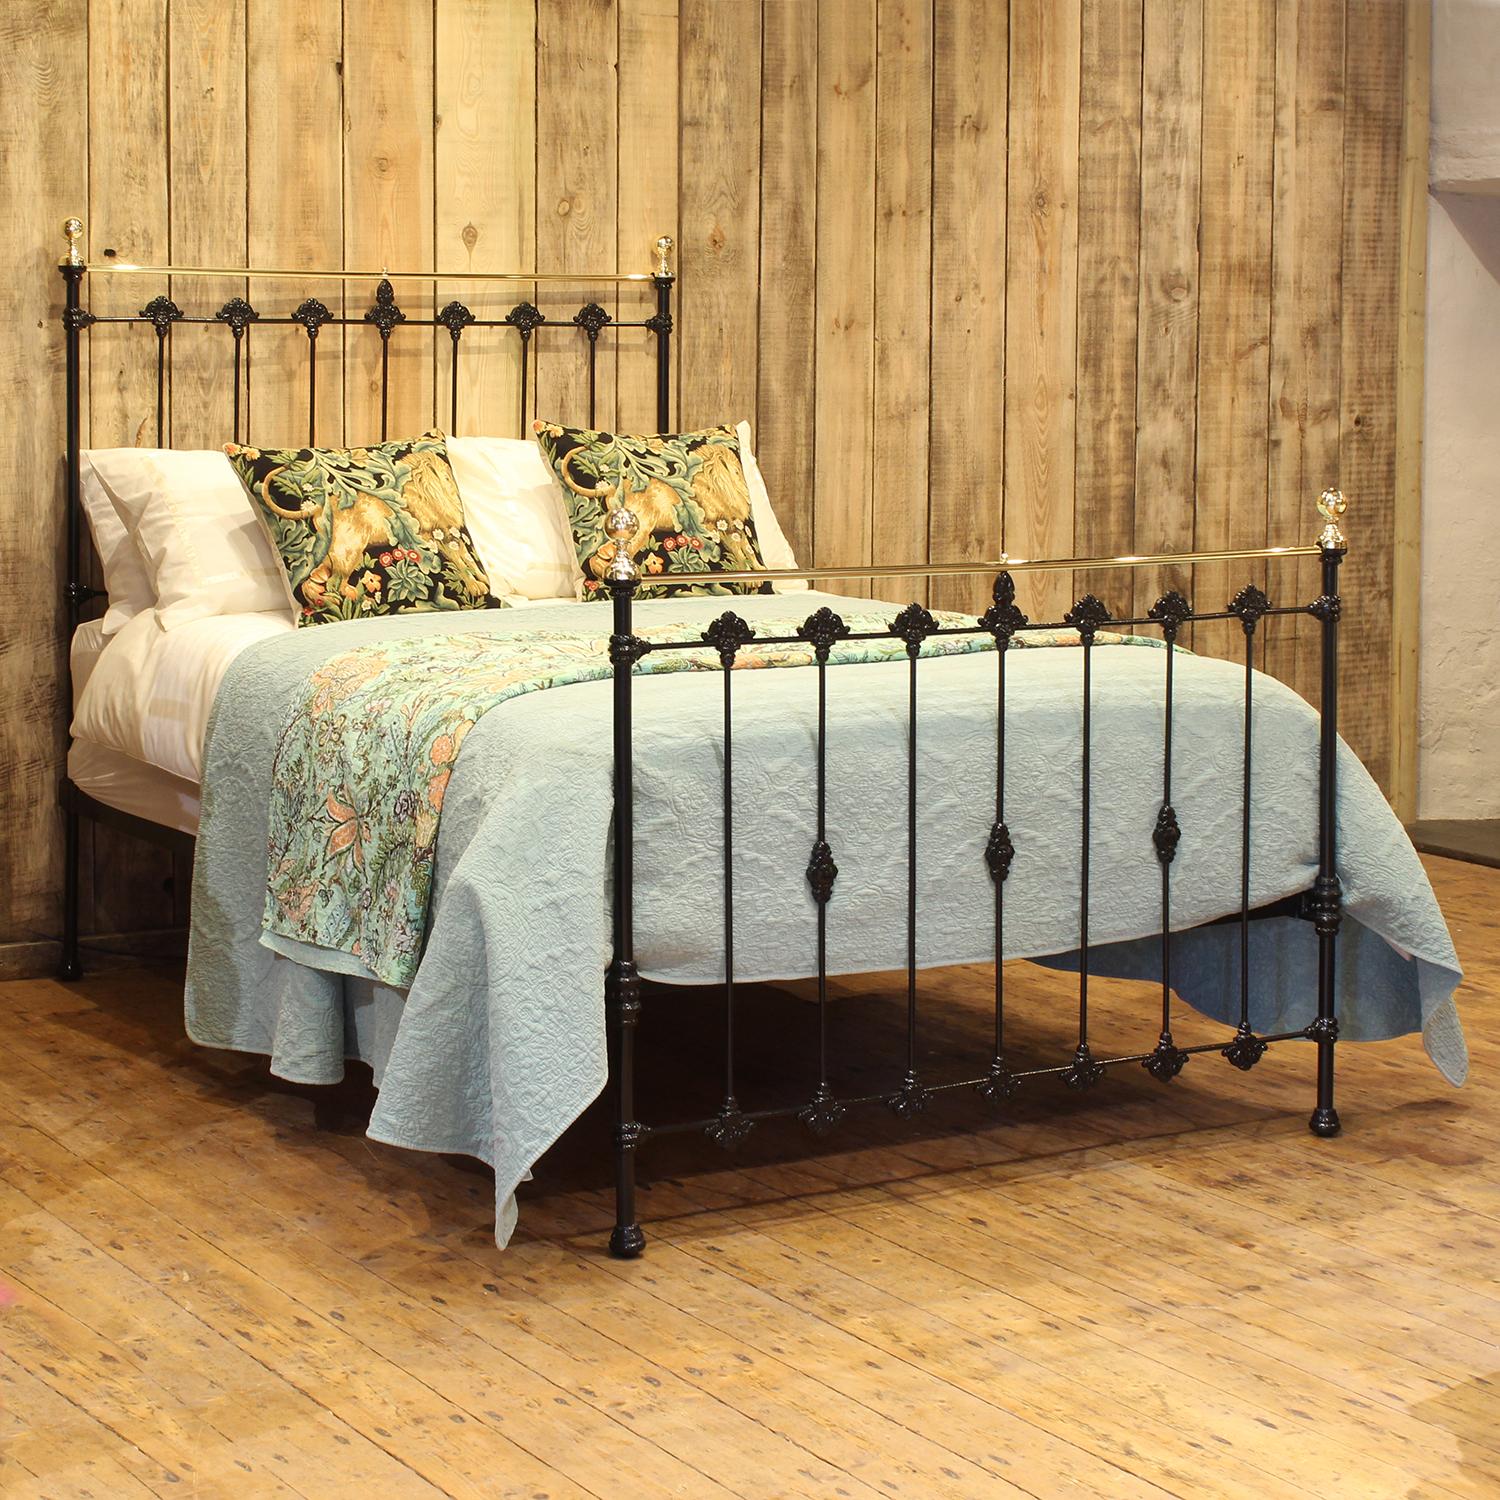 Late Victorian antique brass and iron bed finished in black, with straight brass top rail, cast collars and round knobs. 

This bed accepts a double size 4ft 6in wide (54 inch or 135cm) base and mattress.

The price includes a firm solid shallow bed